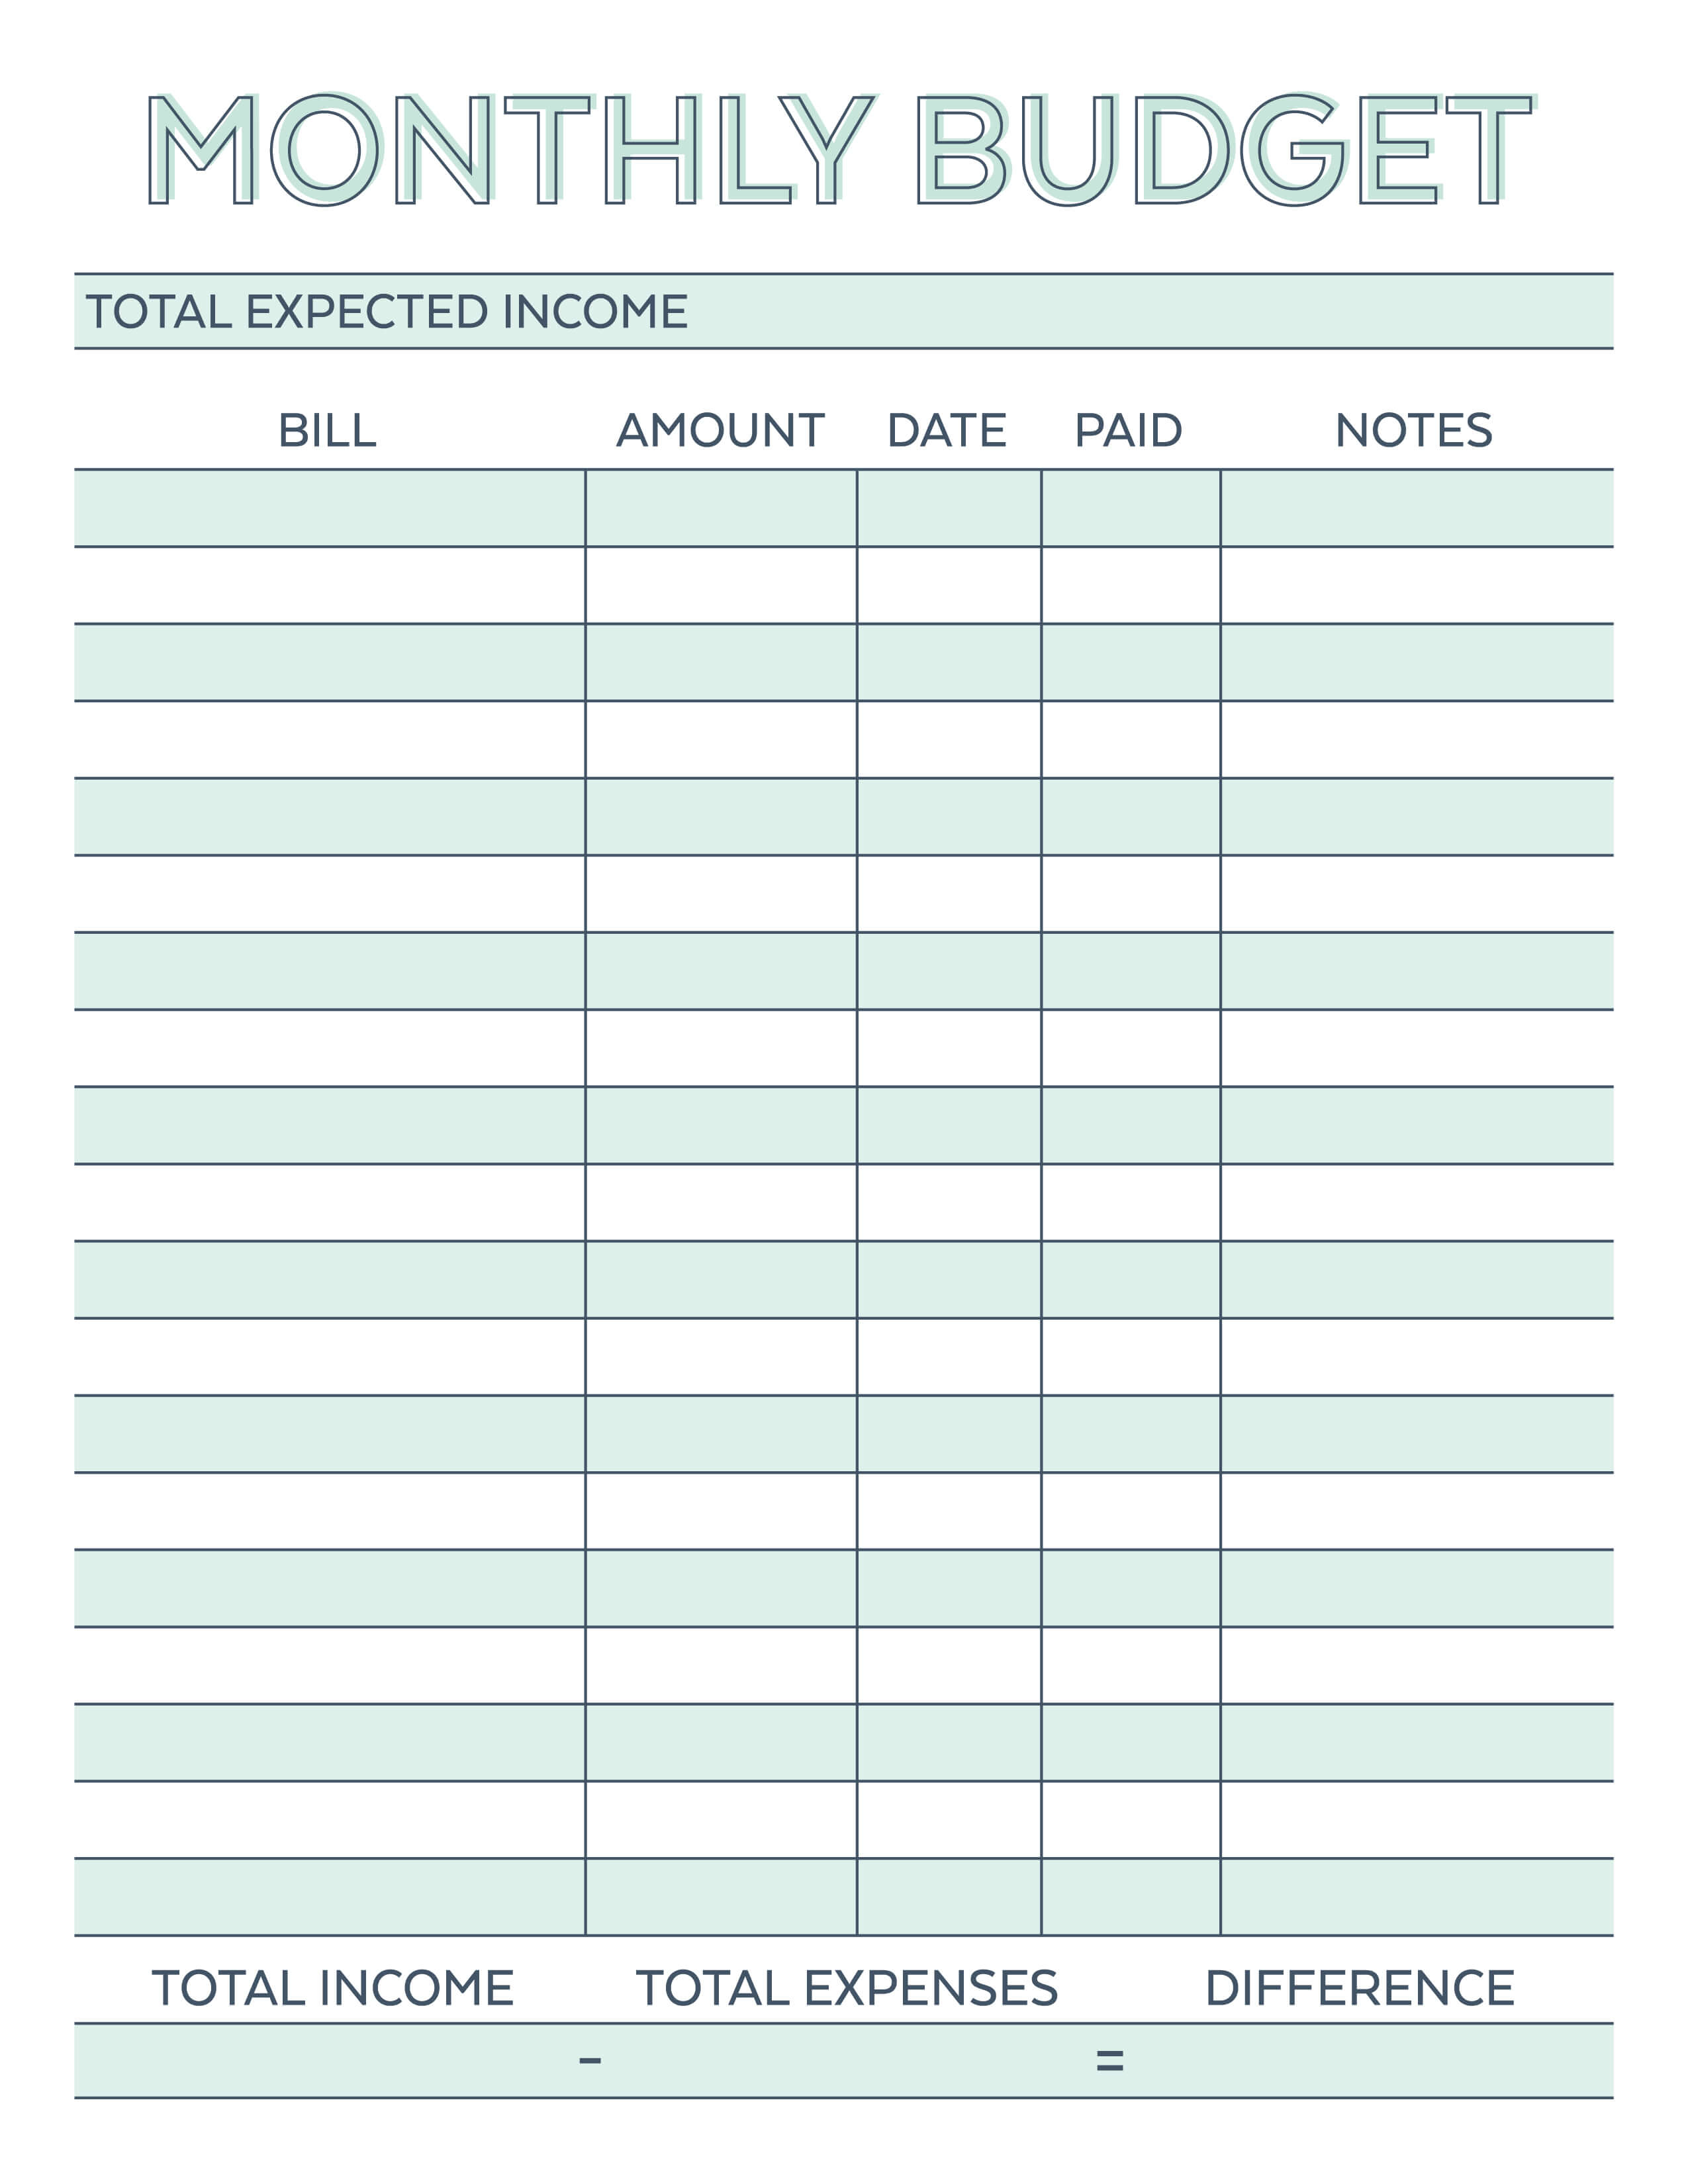 Monthly Budget Planner - Free Printable Budget Worksheet - Free Printable Budget Worksheets